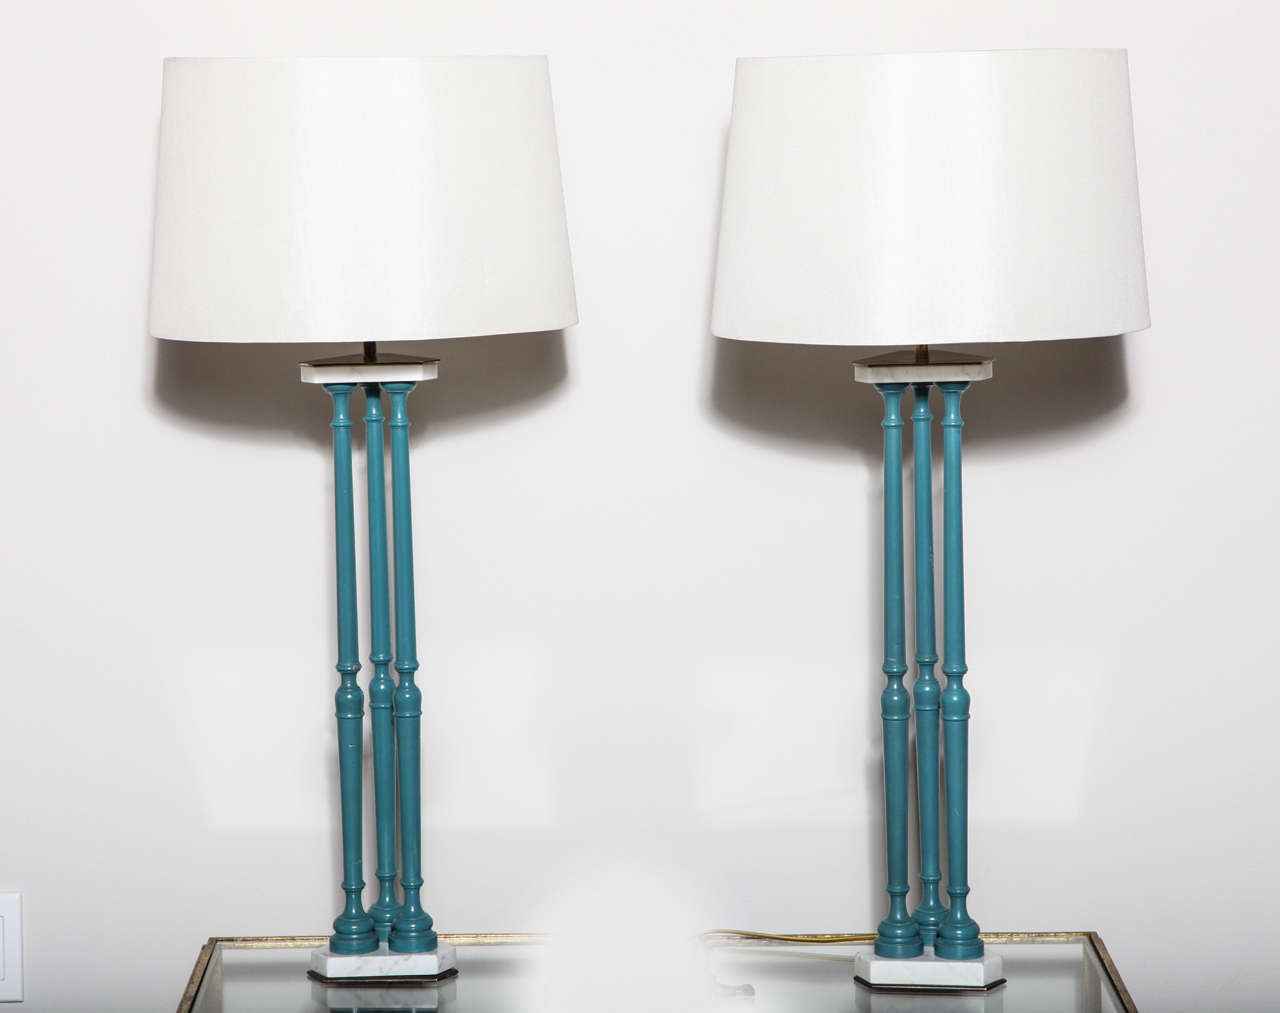 Pair of Italian table lamps from the 1970s with a spindle detail base in turquoise and Carrara marble.